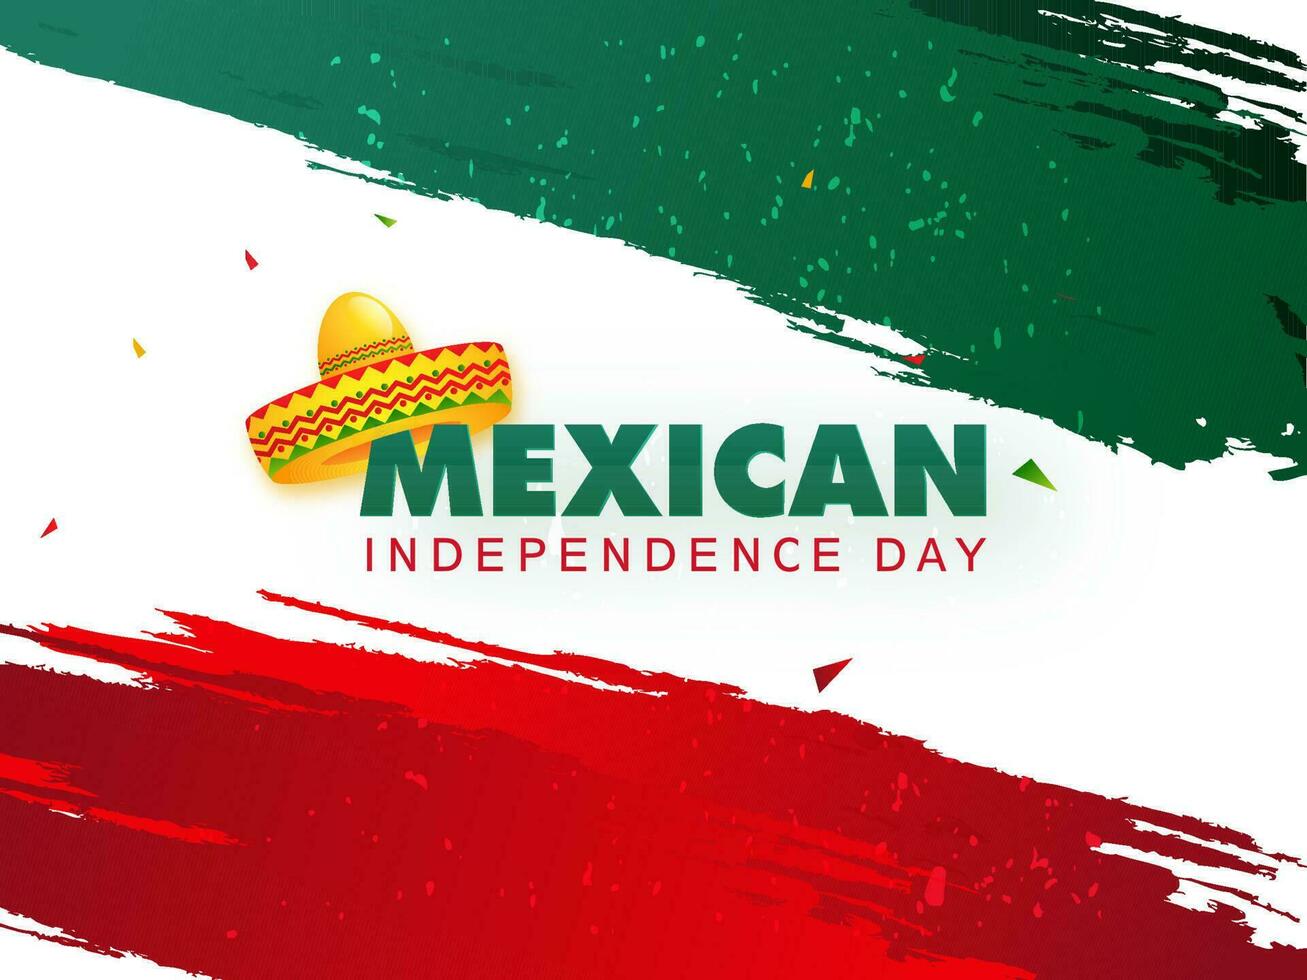 Typography of Mexican Independence Day with sombrero hat illustration on green and red brush stroke background. Can be Used as greeting card design. vector